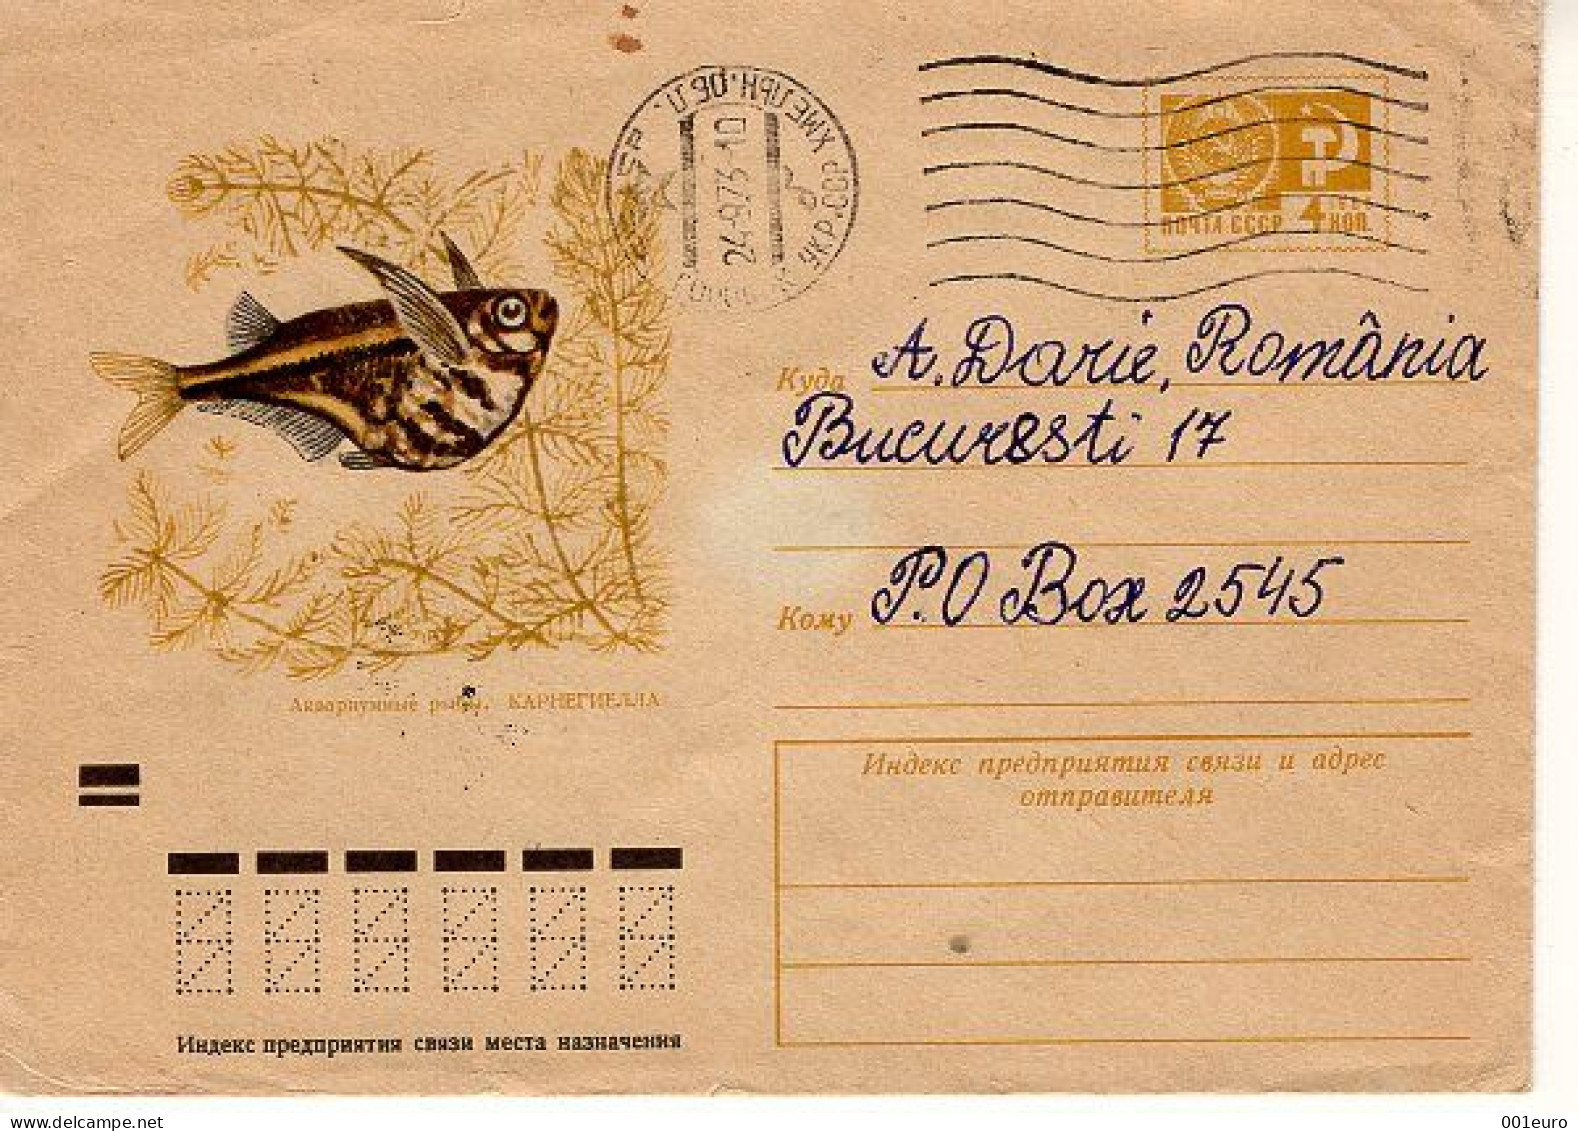 RUSSIA [USSR]: 1971 AQUARIUM FISH Used Postal Stationery Cover - Registered Shipping! - 1960-69